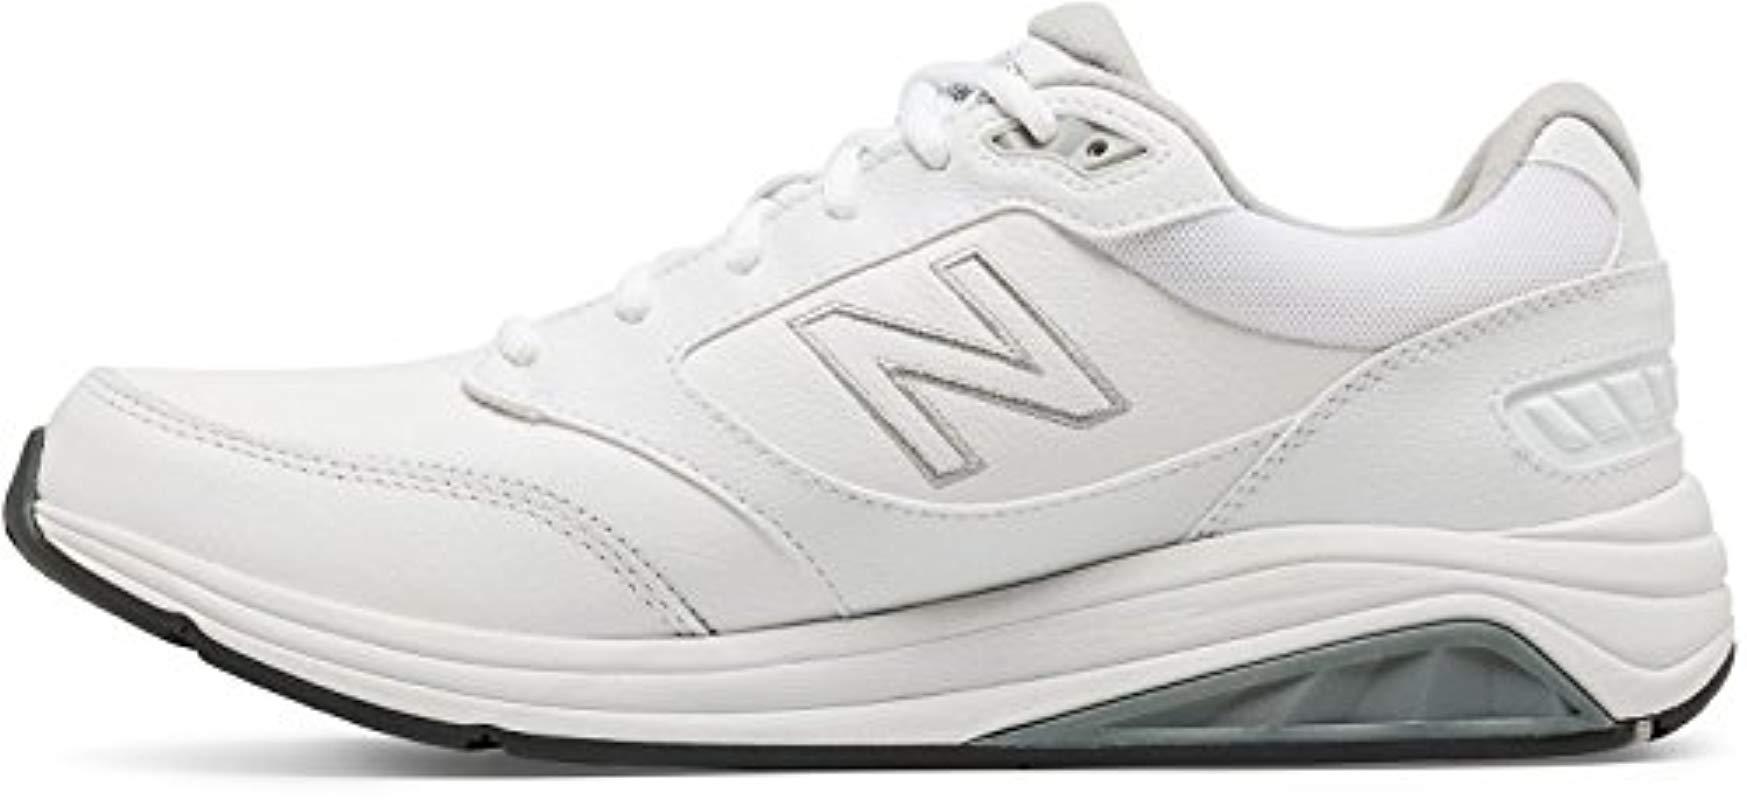 New Balance 928 Low Rise Hiking Boots in White for Men - Lyst